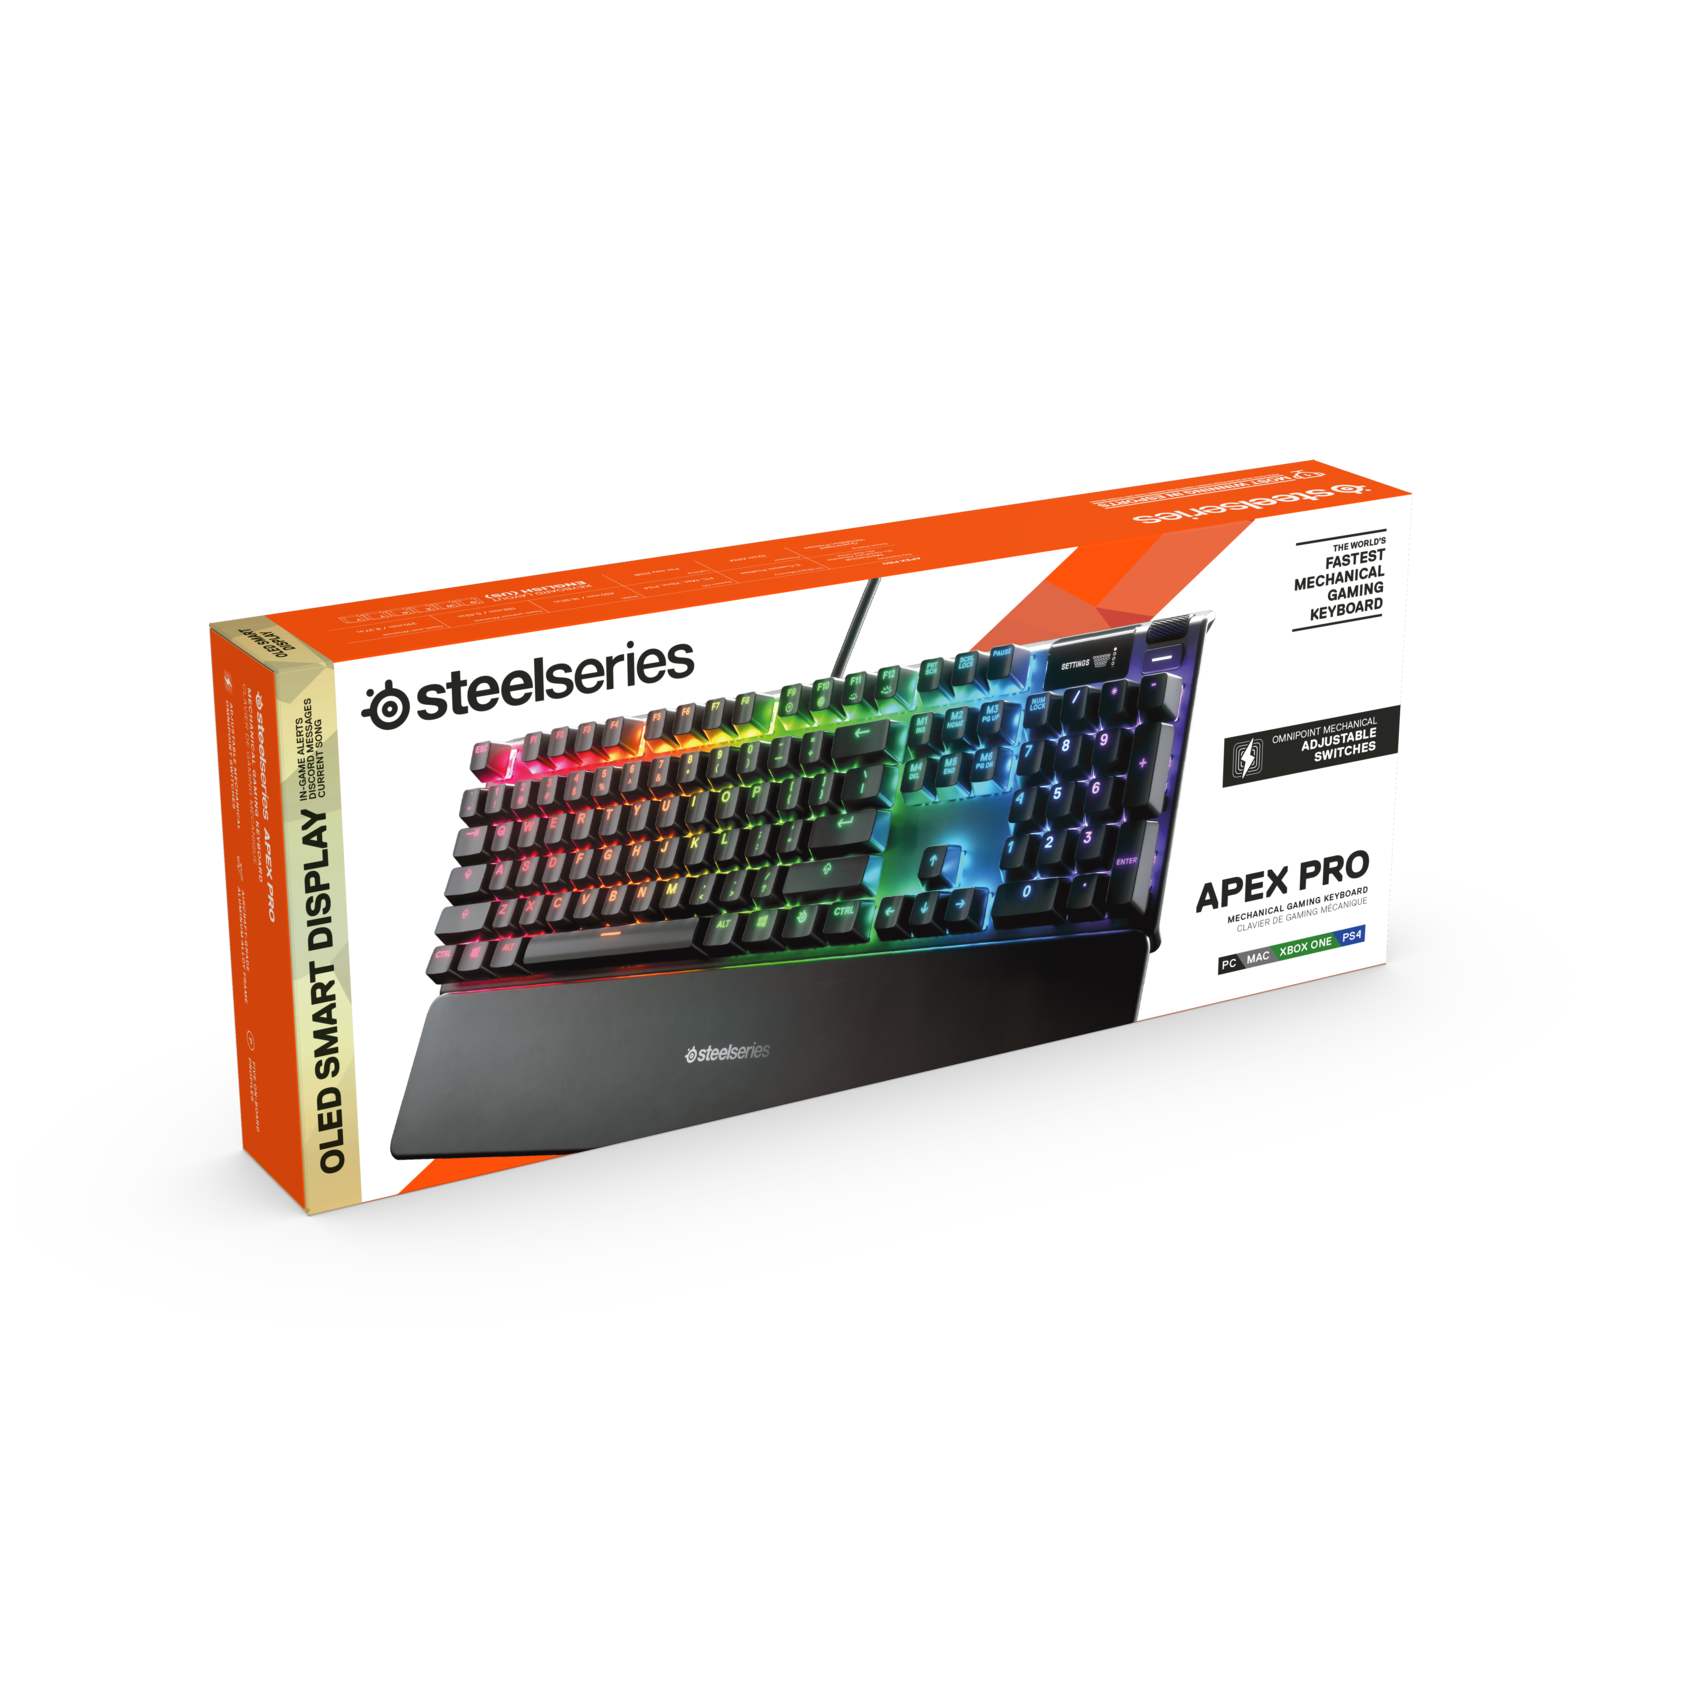 Buy Steelseries Apex Pro Gaming Keyboard Online Shop Electronics Appliances On Carrefour Uae